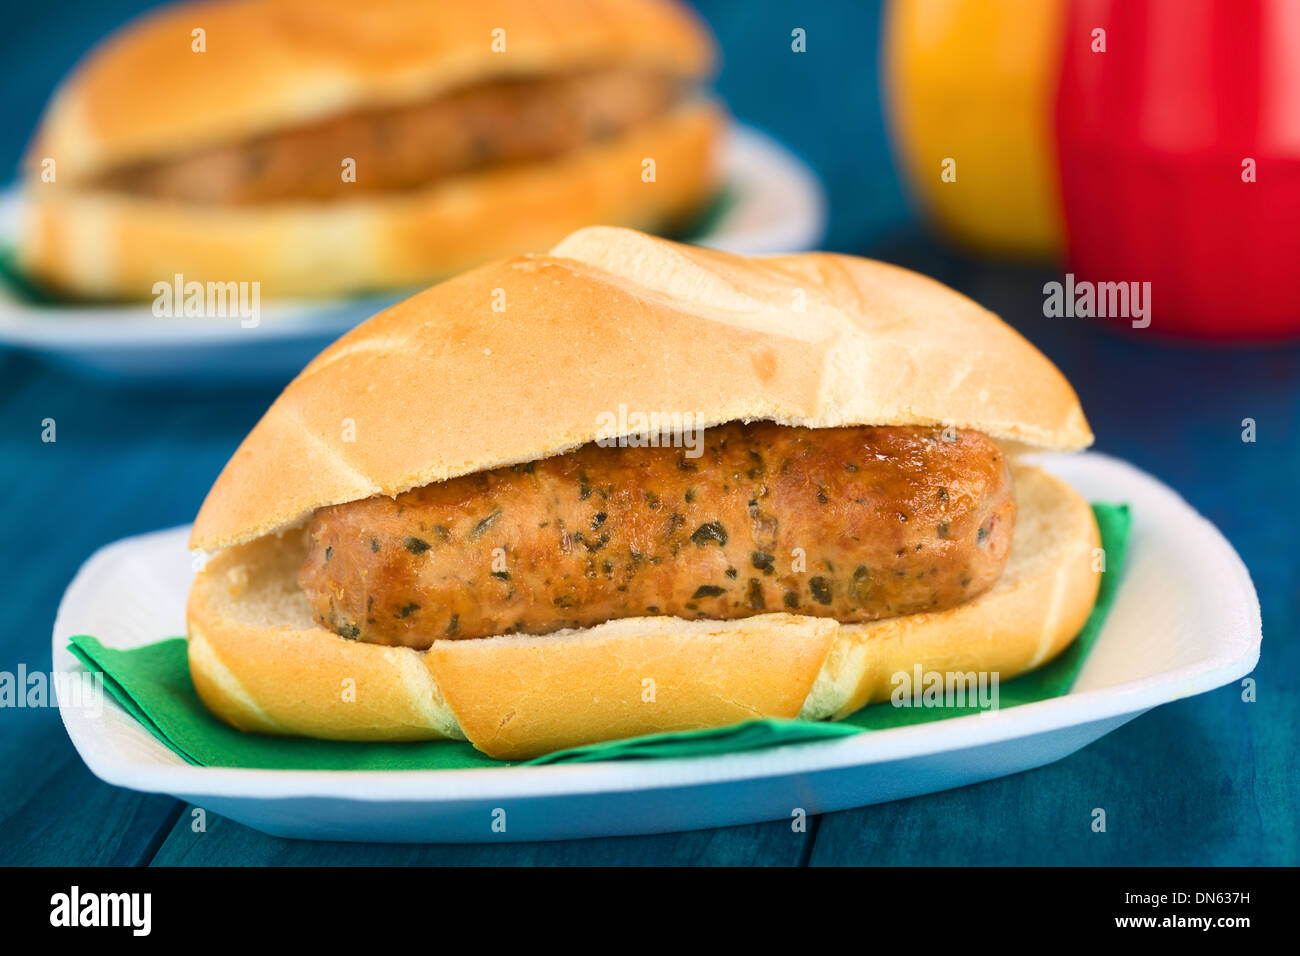 Fried bratwurst in bun, traditional German fast food served on disposable plate with napkin, ketchup and mustard in the back Stock Photo